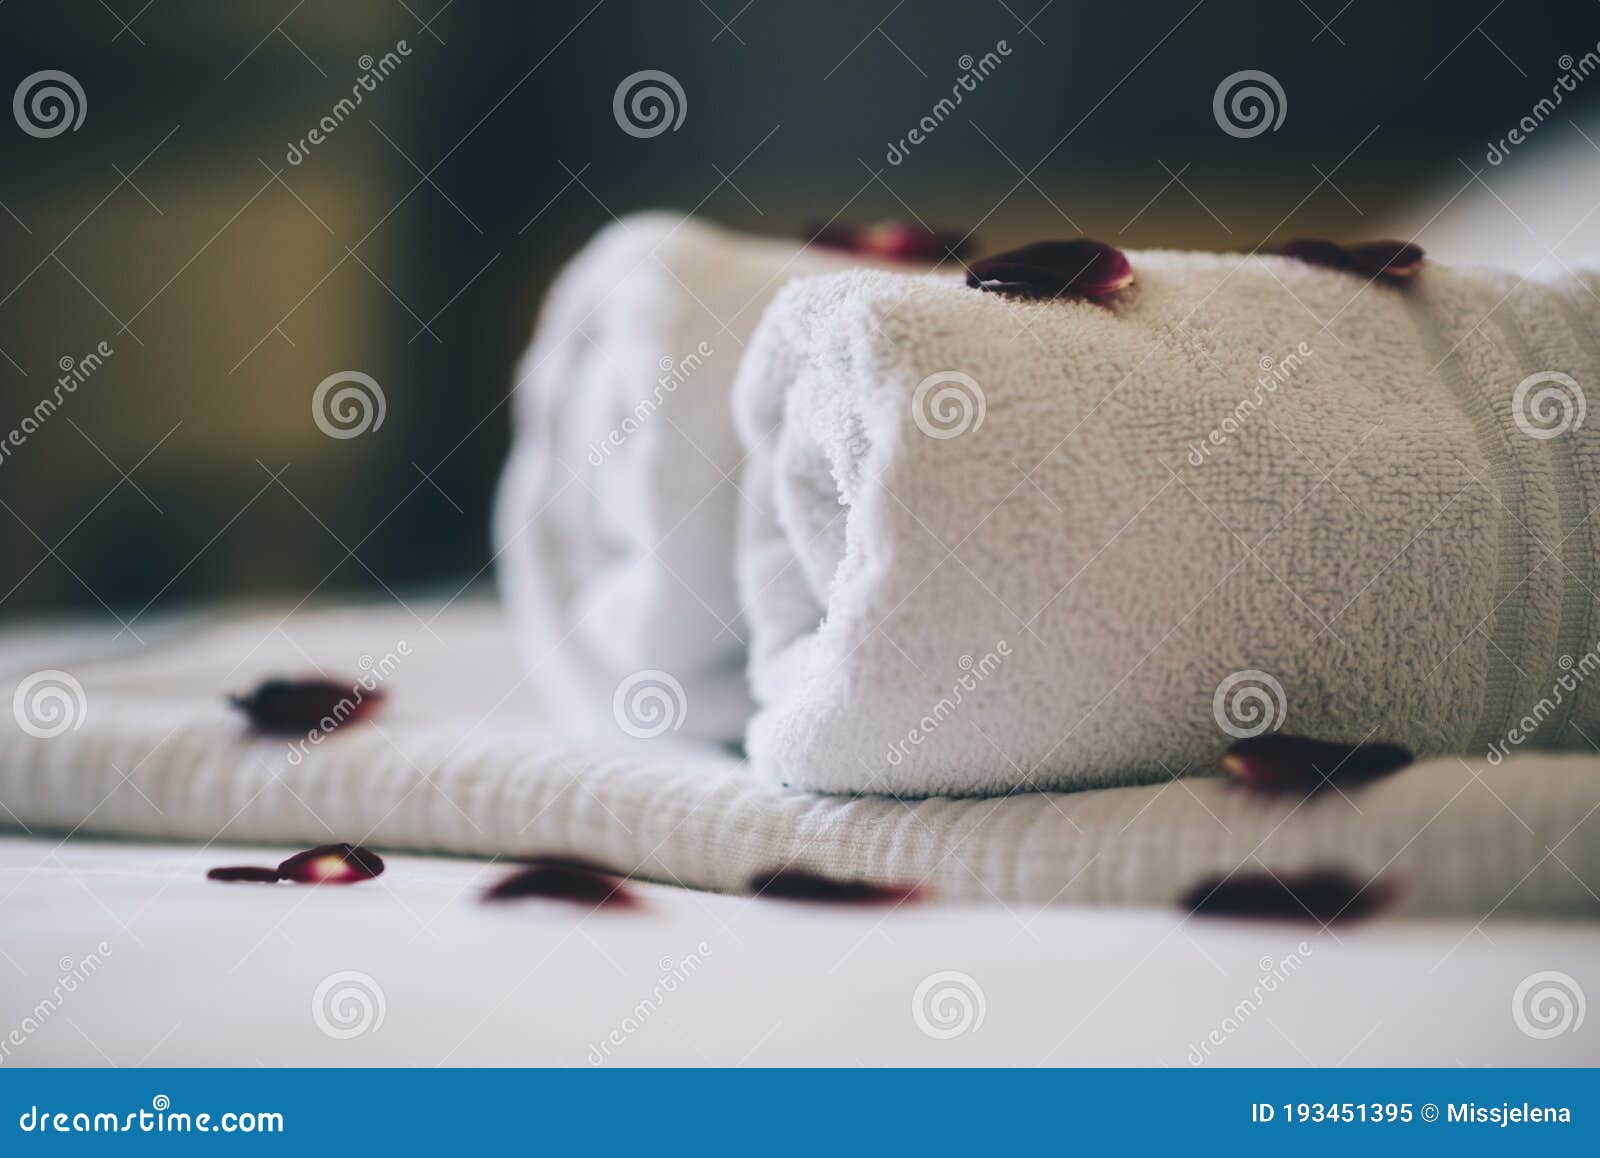 discretie Ban Dakraam Luxury Hotel Room with White Spa Towels on Bed Sheet with Rose Petals.  Romantic Holiday Weekend with Wellness Body Treatment and Stock Image -  Image of center, arrangement: 193451395